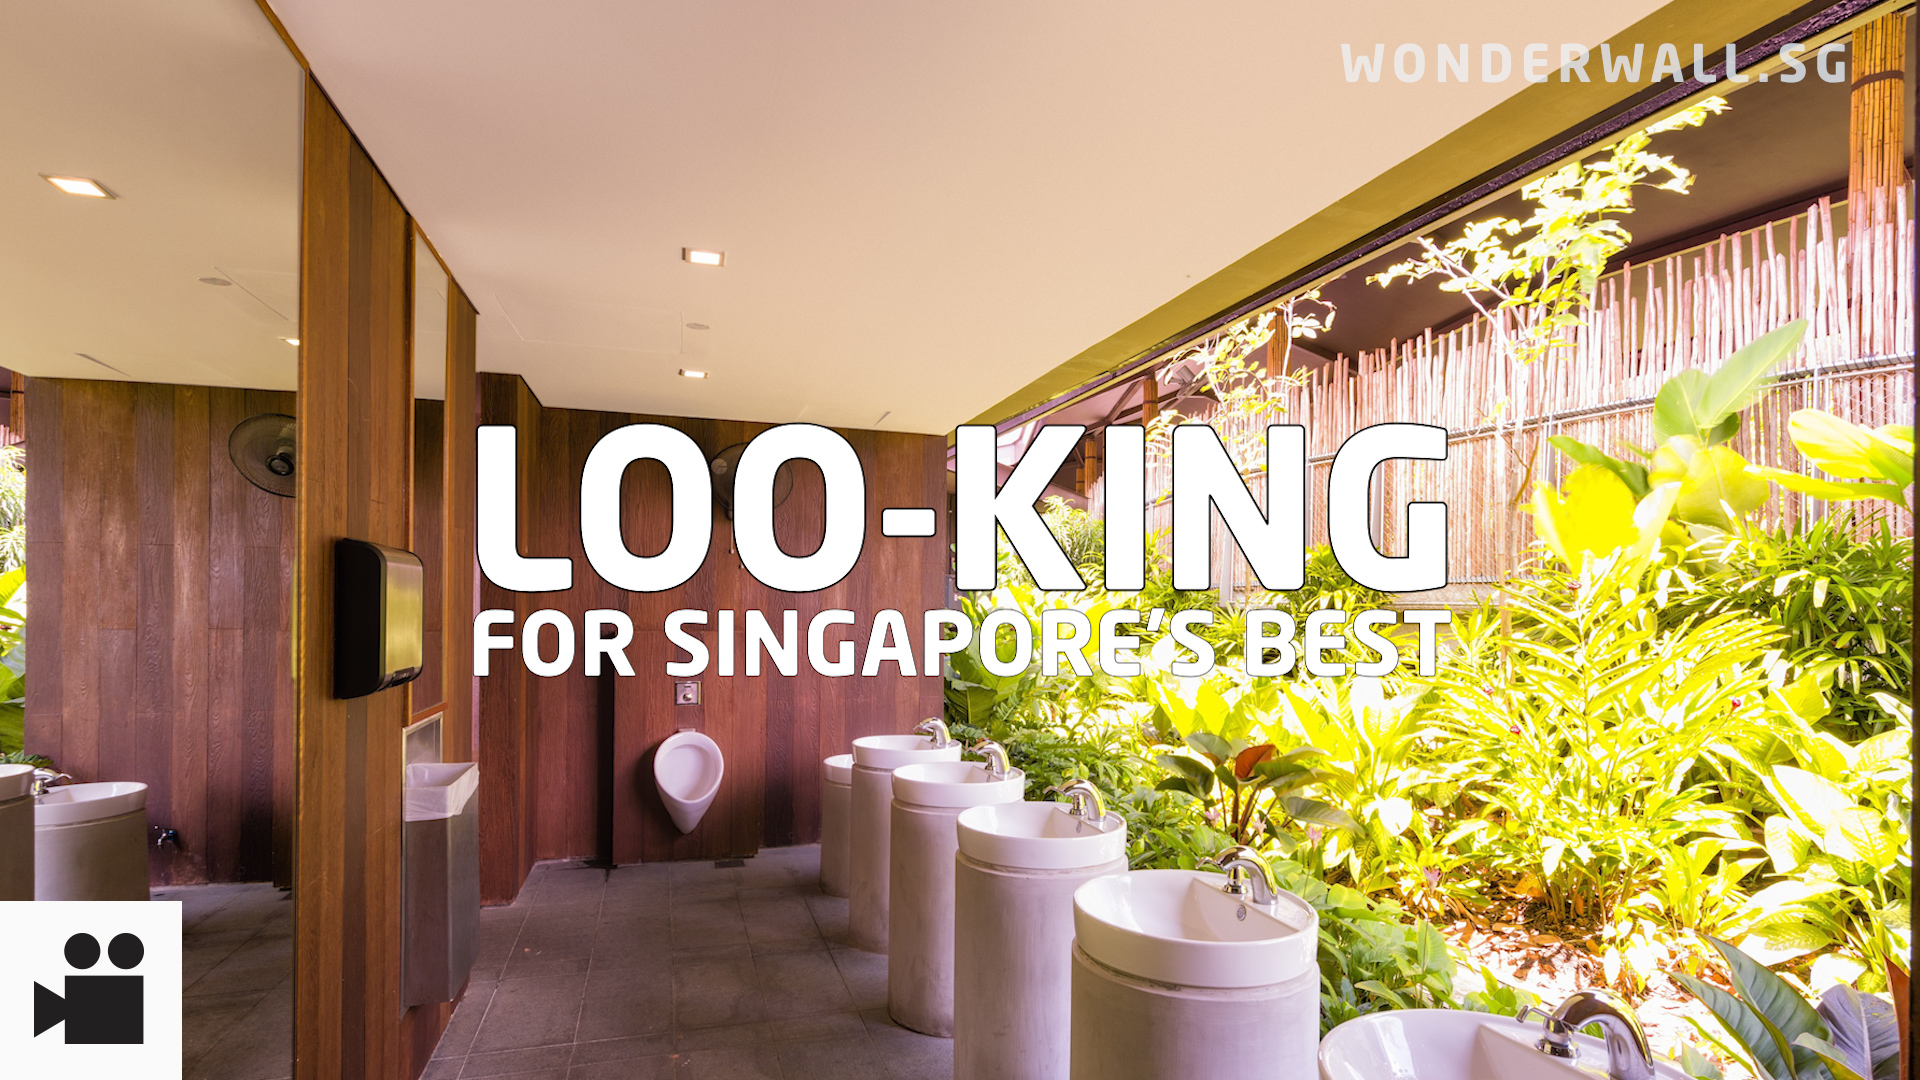 The Guide To The Most Photogenic Bathrooms In Singapore